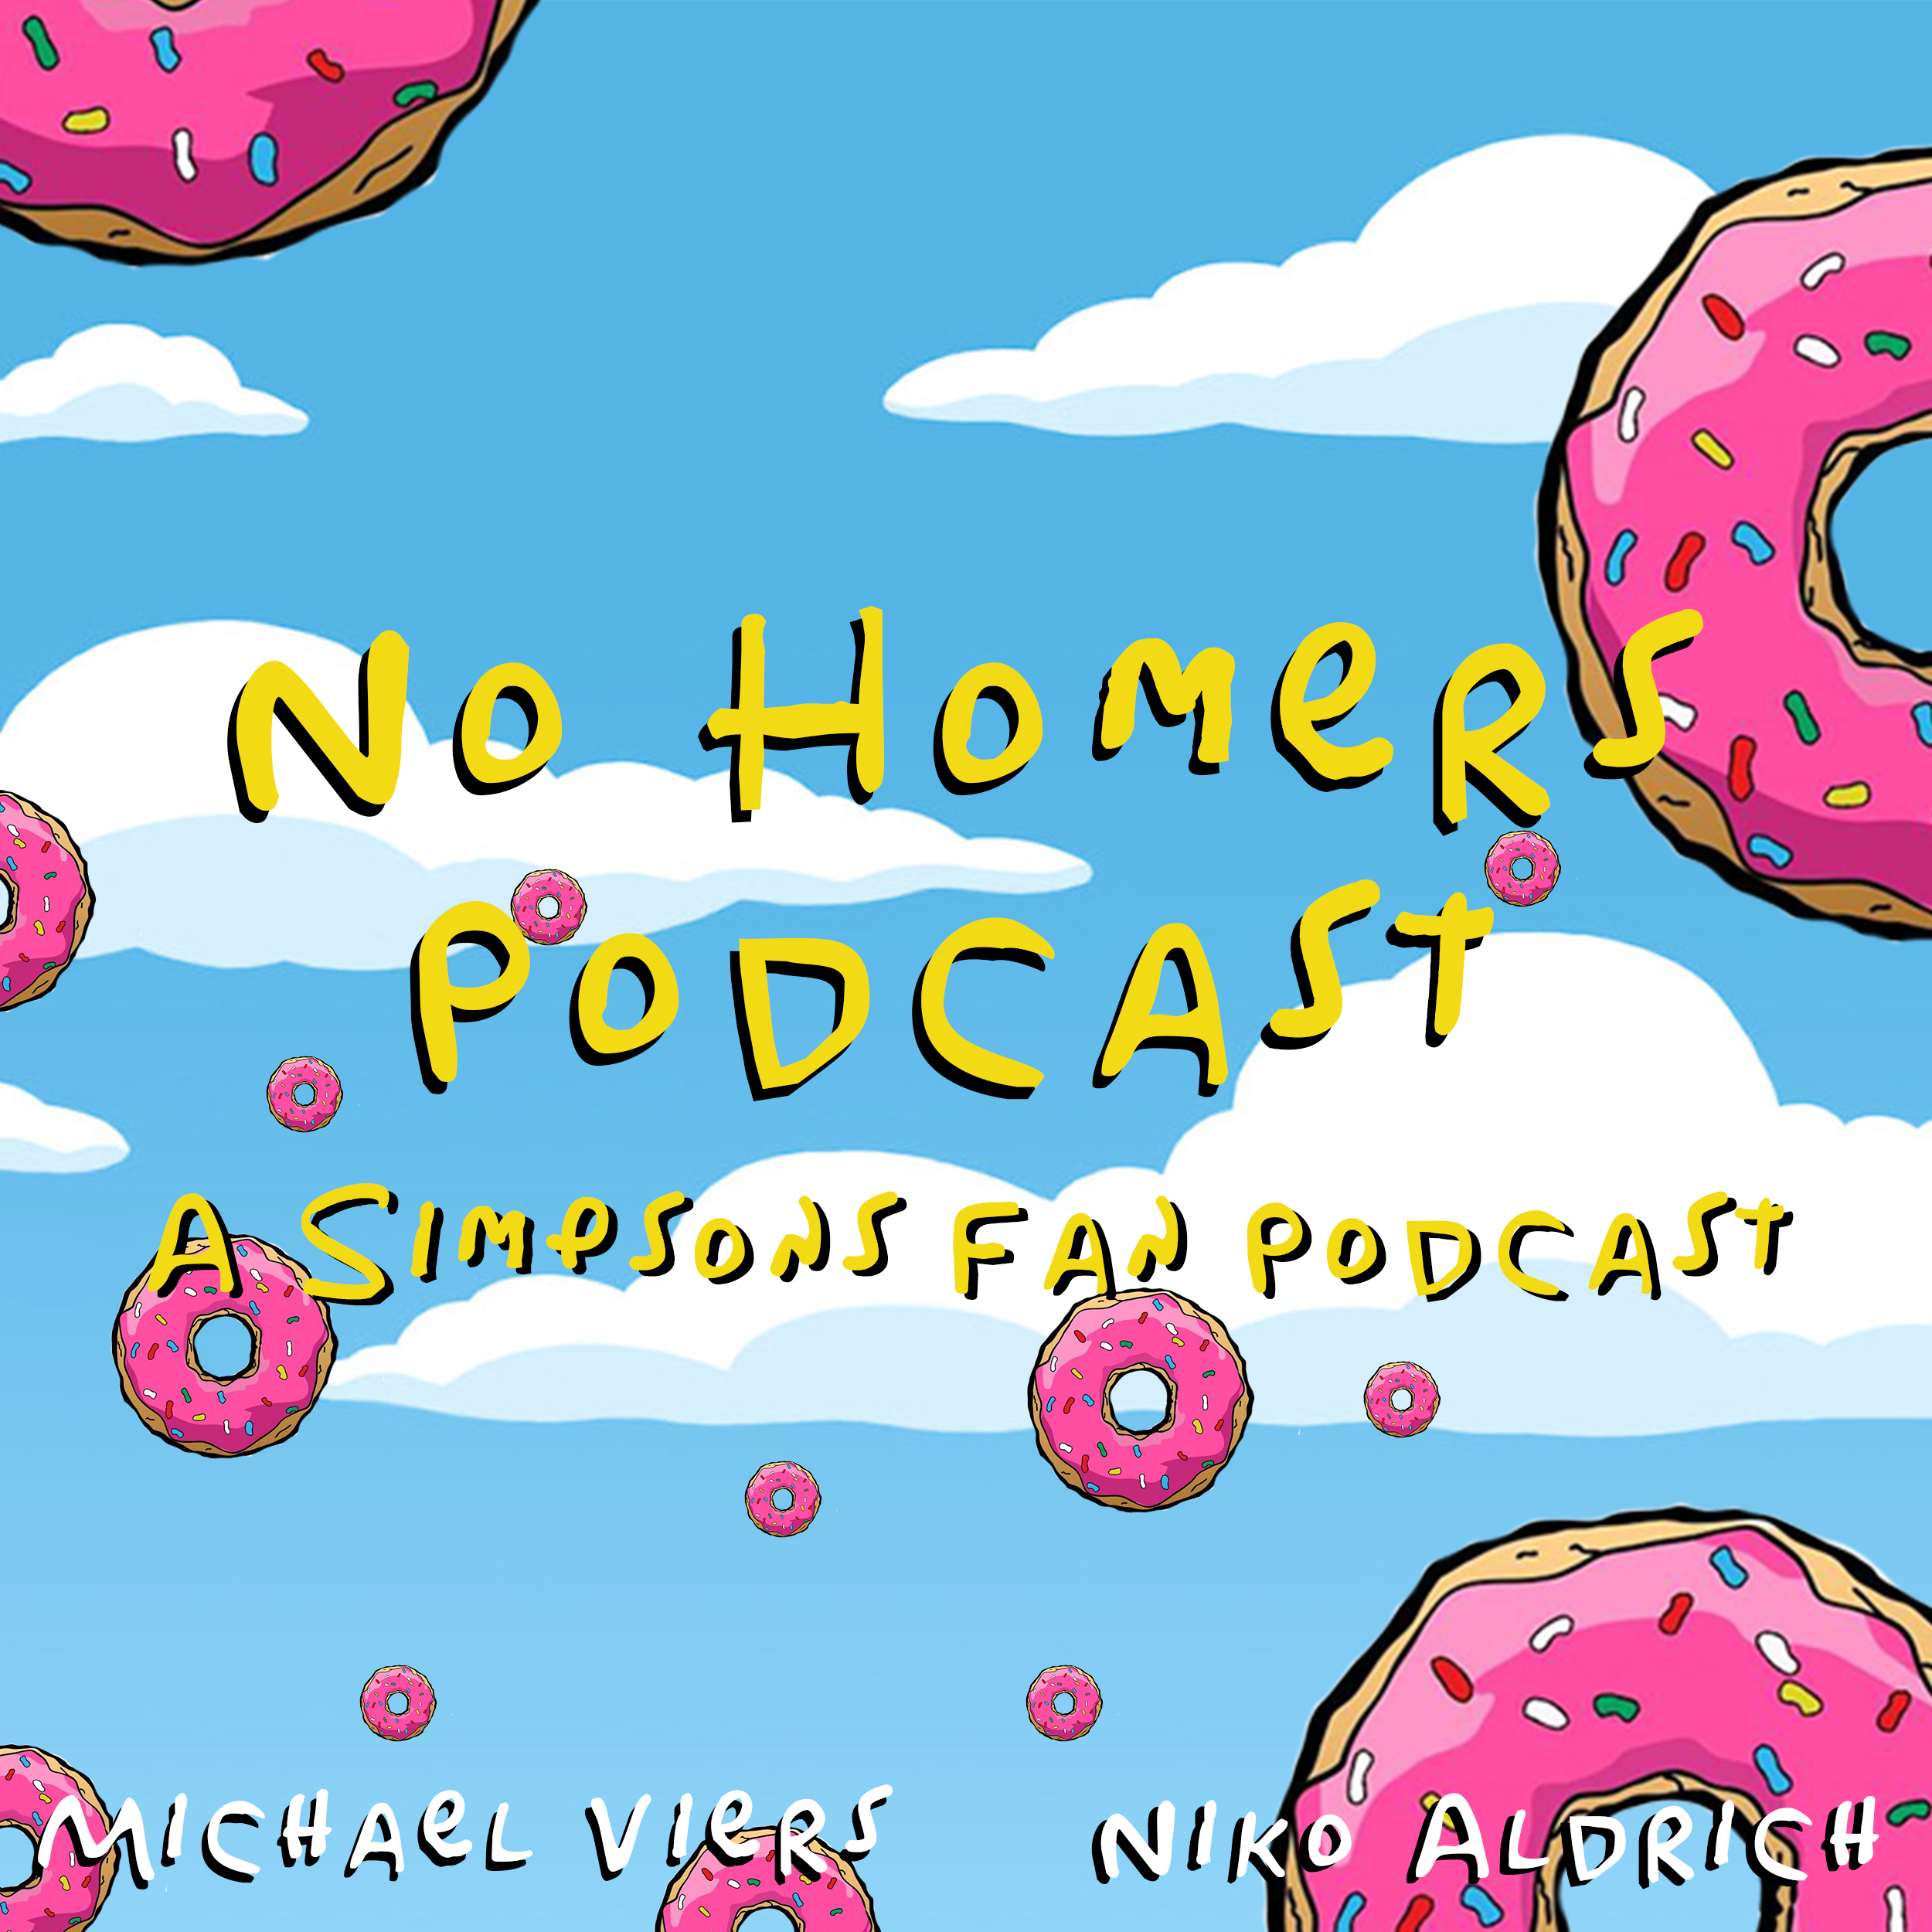 No Homers Podcast